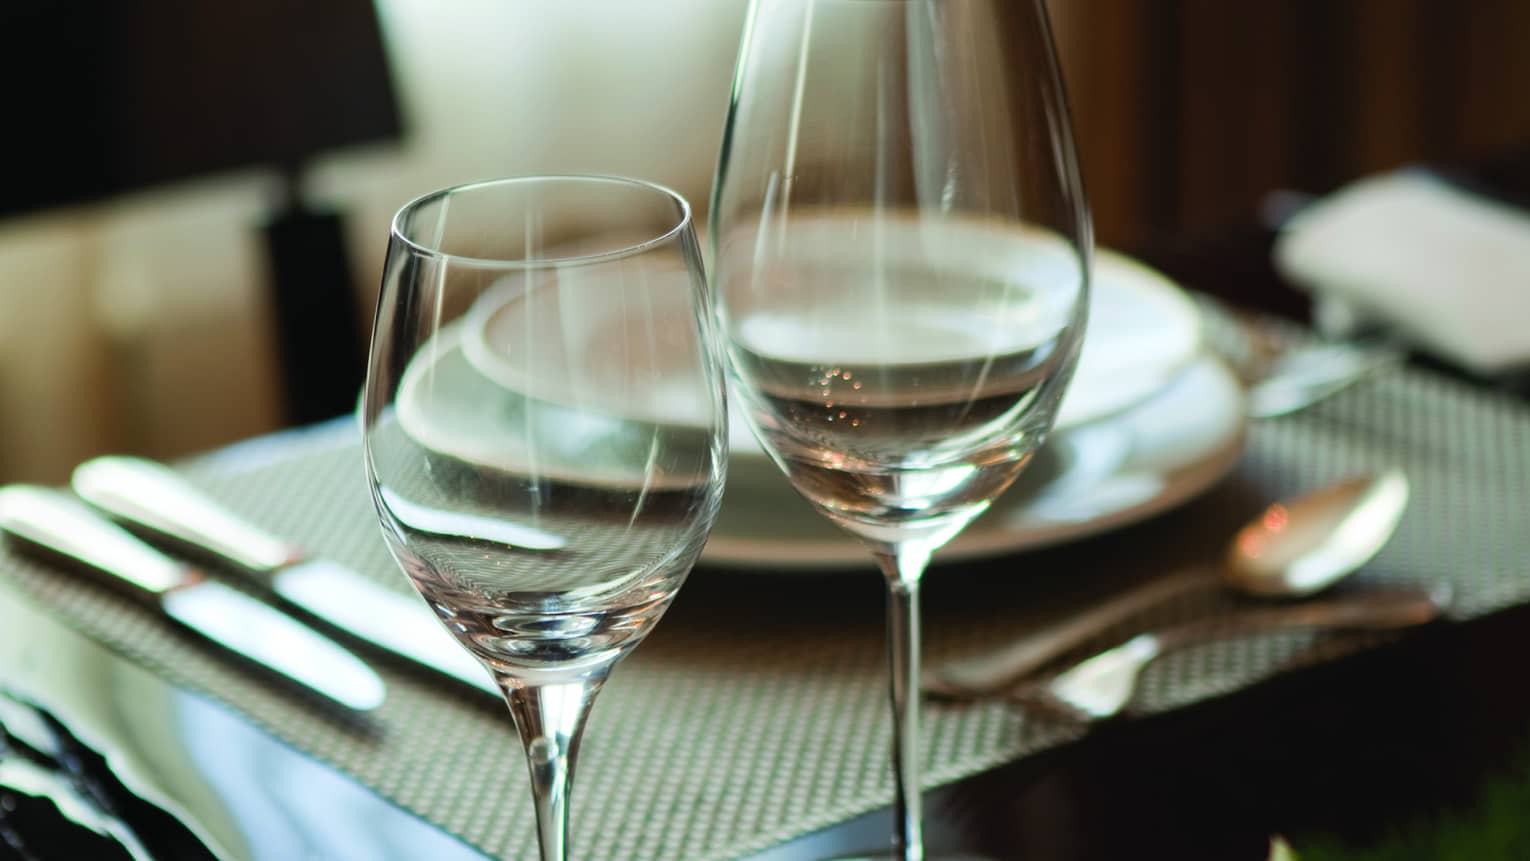 Two wine glasses on hotel room dining table